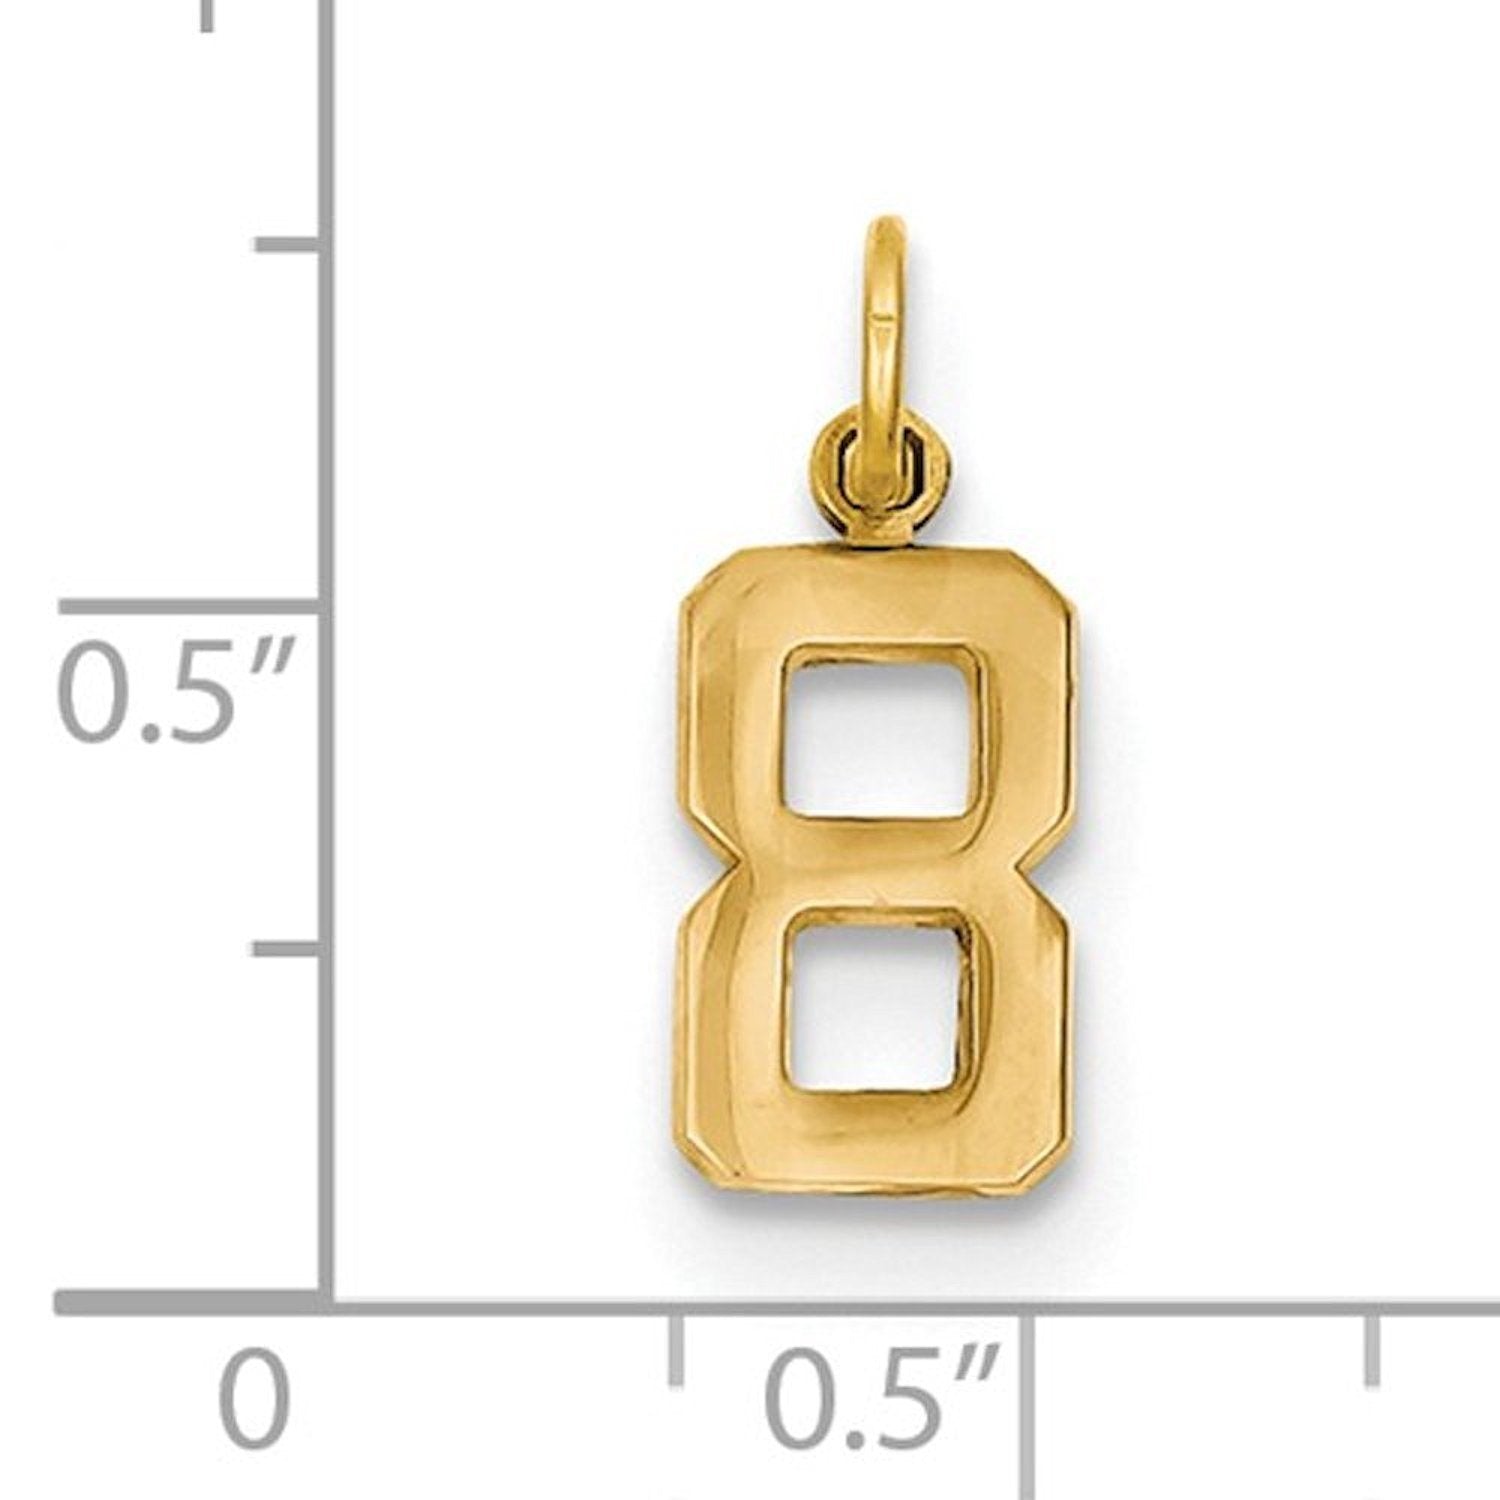 14k Yellow Gold Number 8 Eight Pendant Charm